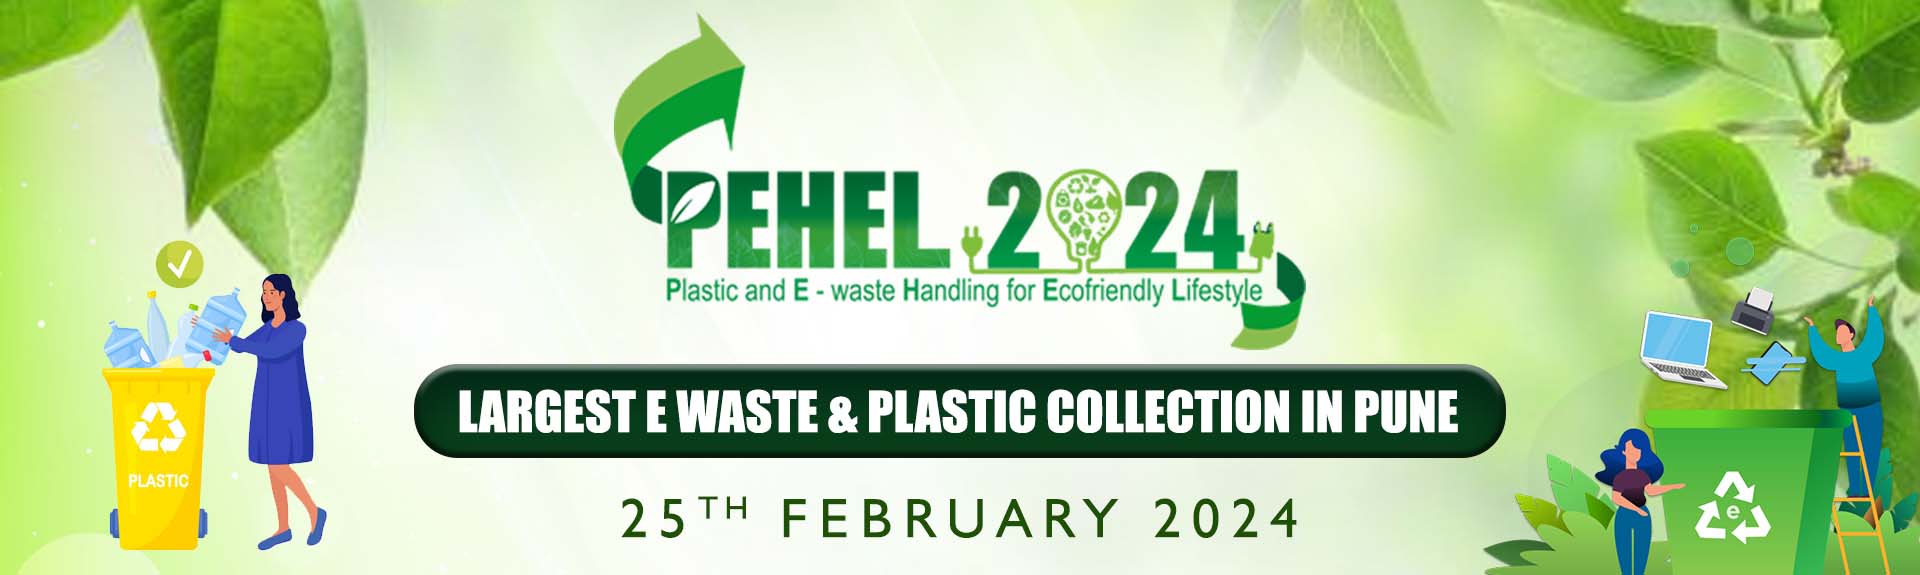 PEHEL 2024 MEGADRIVE - PLASTIC AND E-WASTE HANDLING FOR ECO-FRIENDLY LIFESTYLE